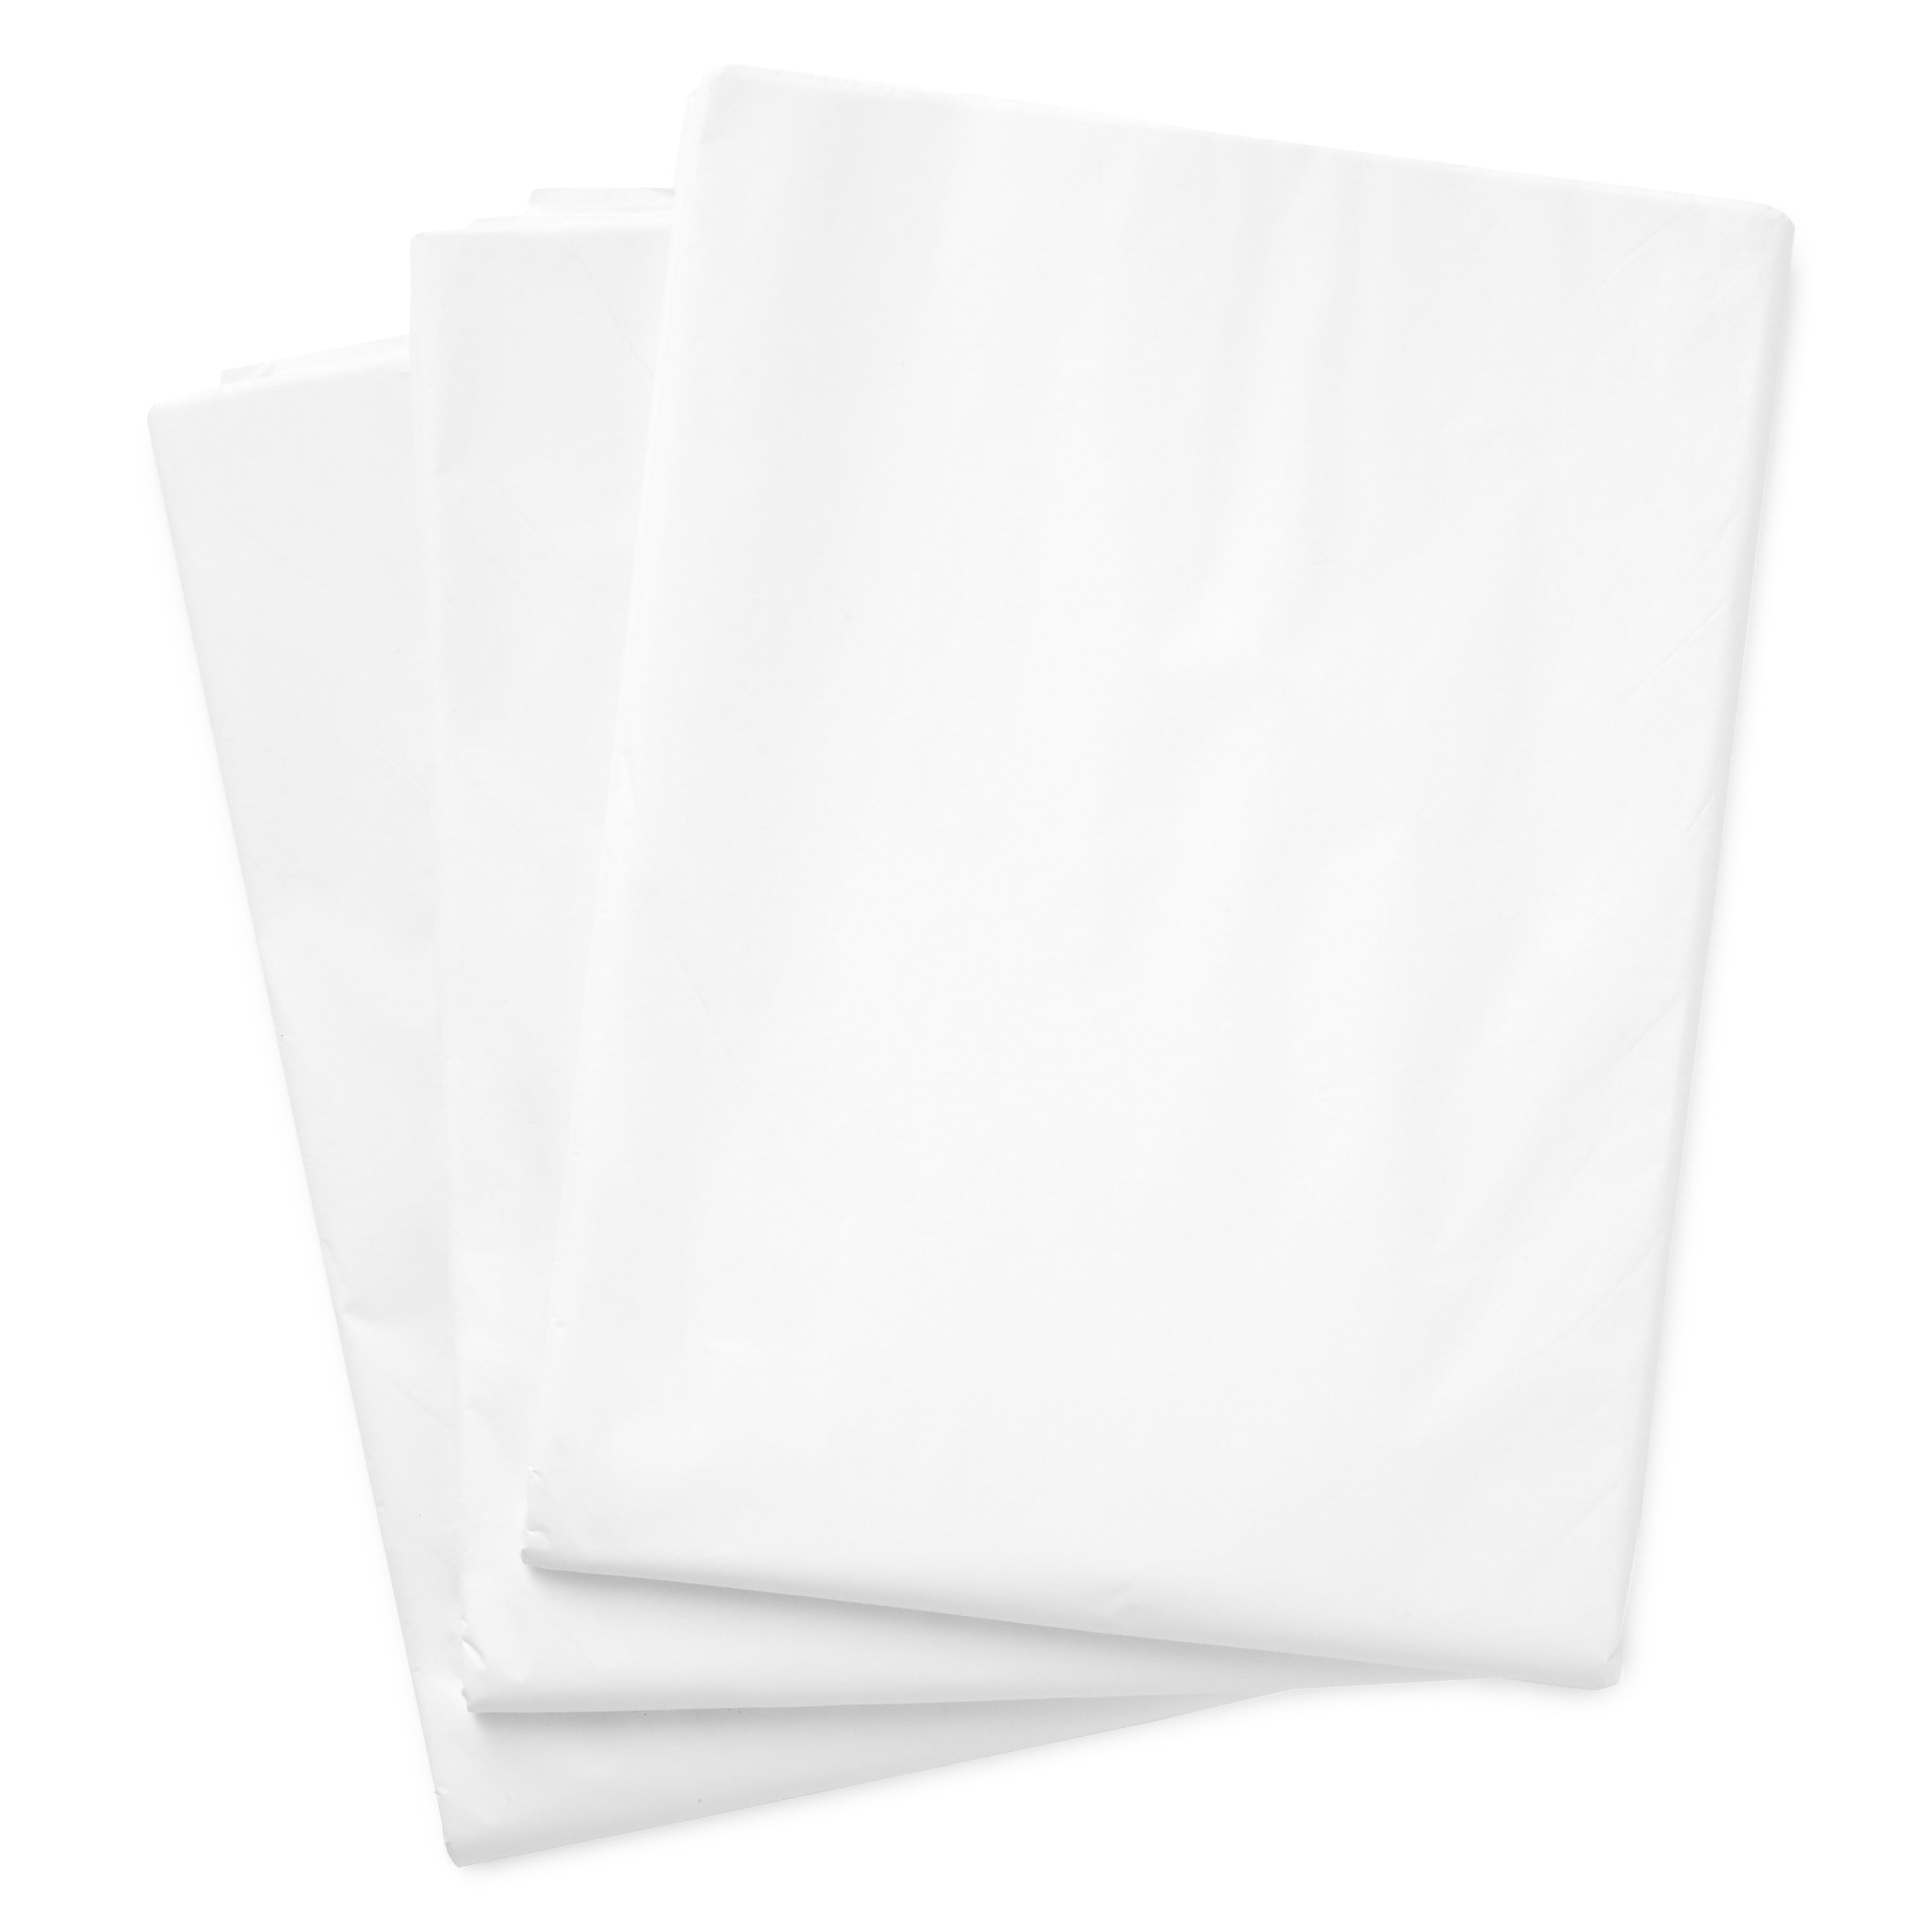 100 x NEW SHEETS OF WHITE ACID FREE TISSUE PAPER 450x700mm/ GOOD QUALITY 